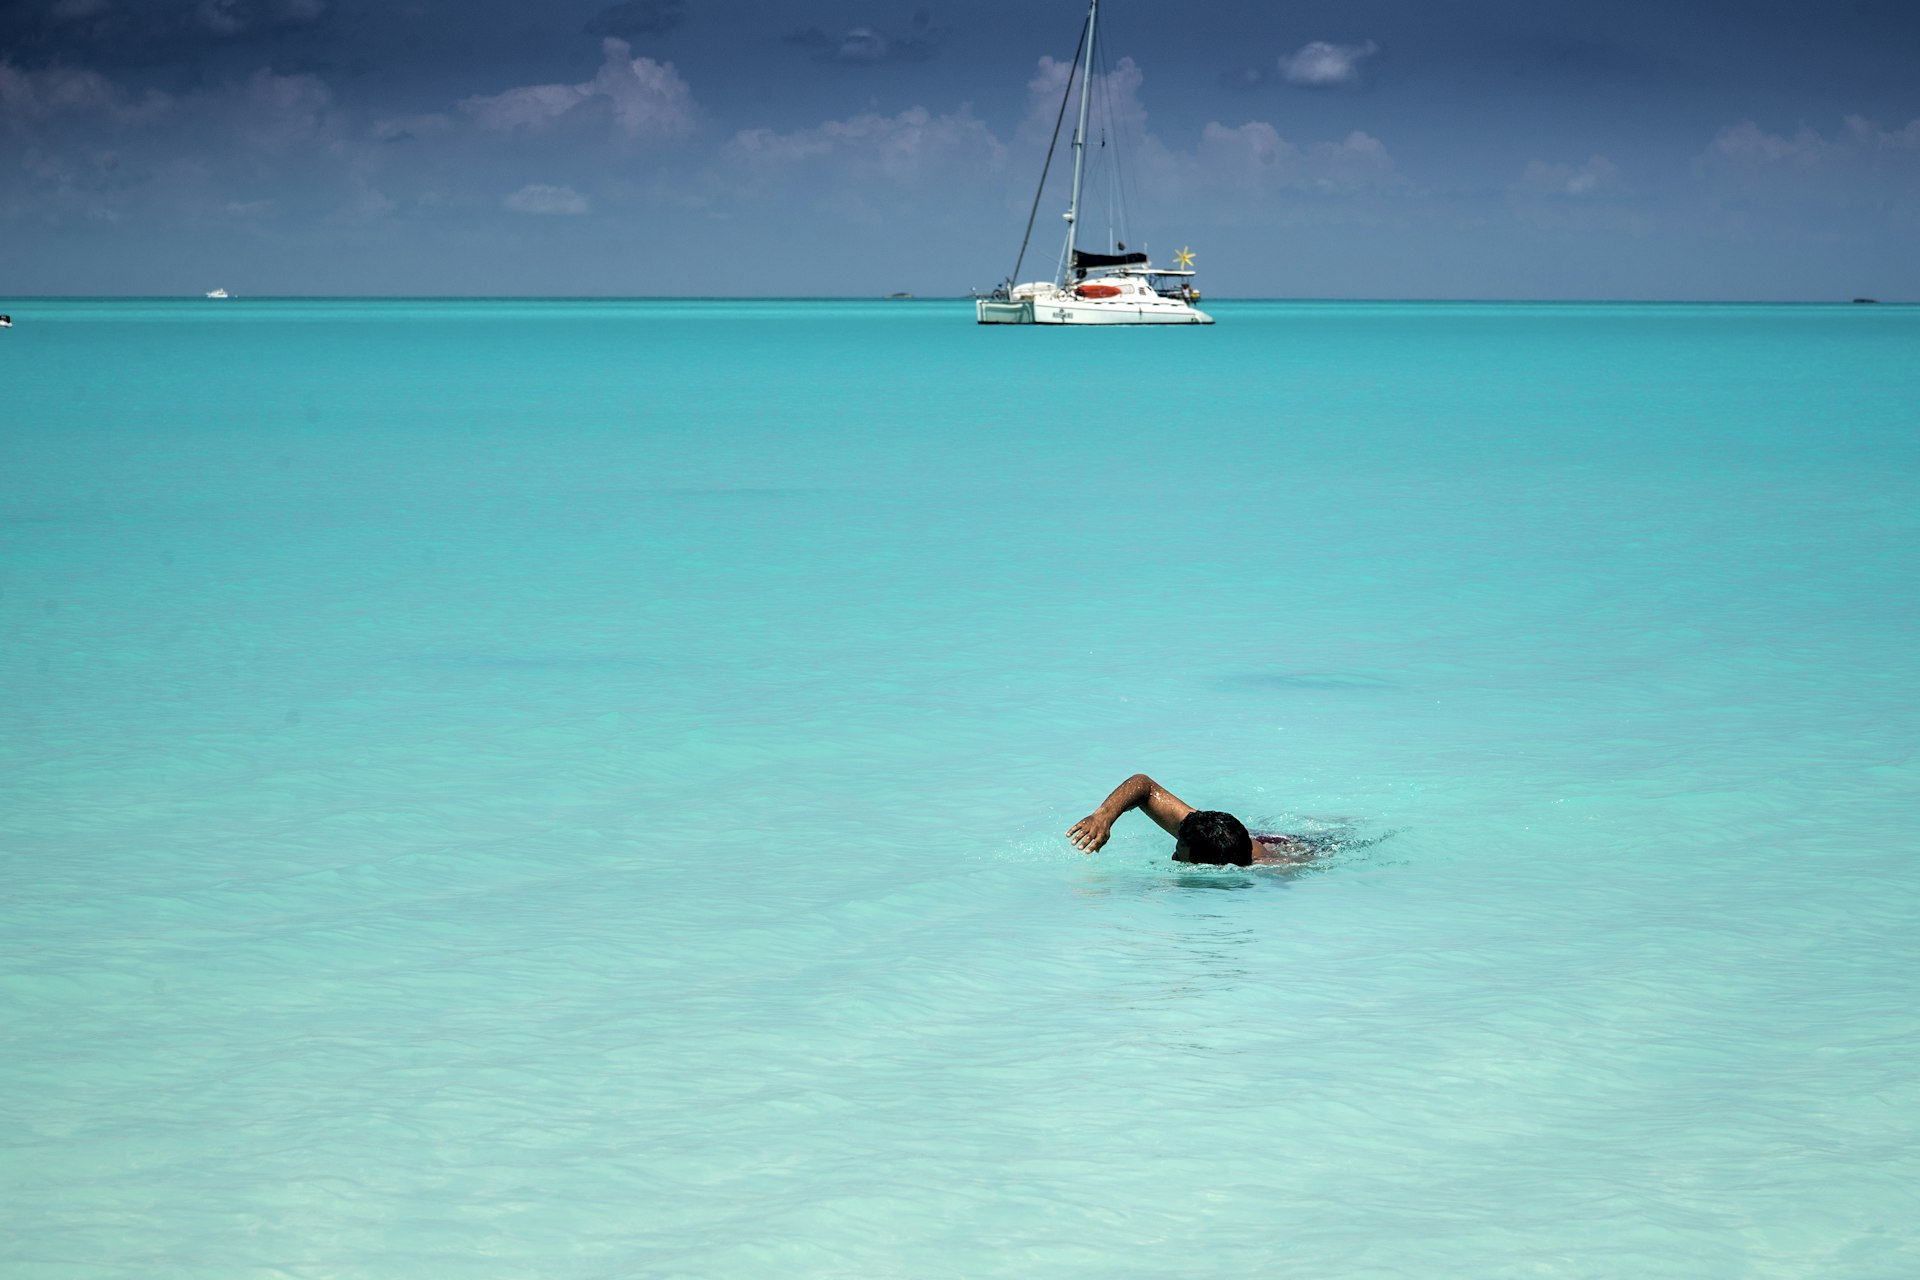 Man swimming to shore in perfectly clear turquoise-colored water. A catamaran sailboat at anchor is in the background.